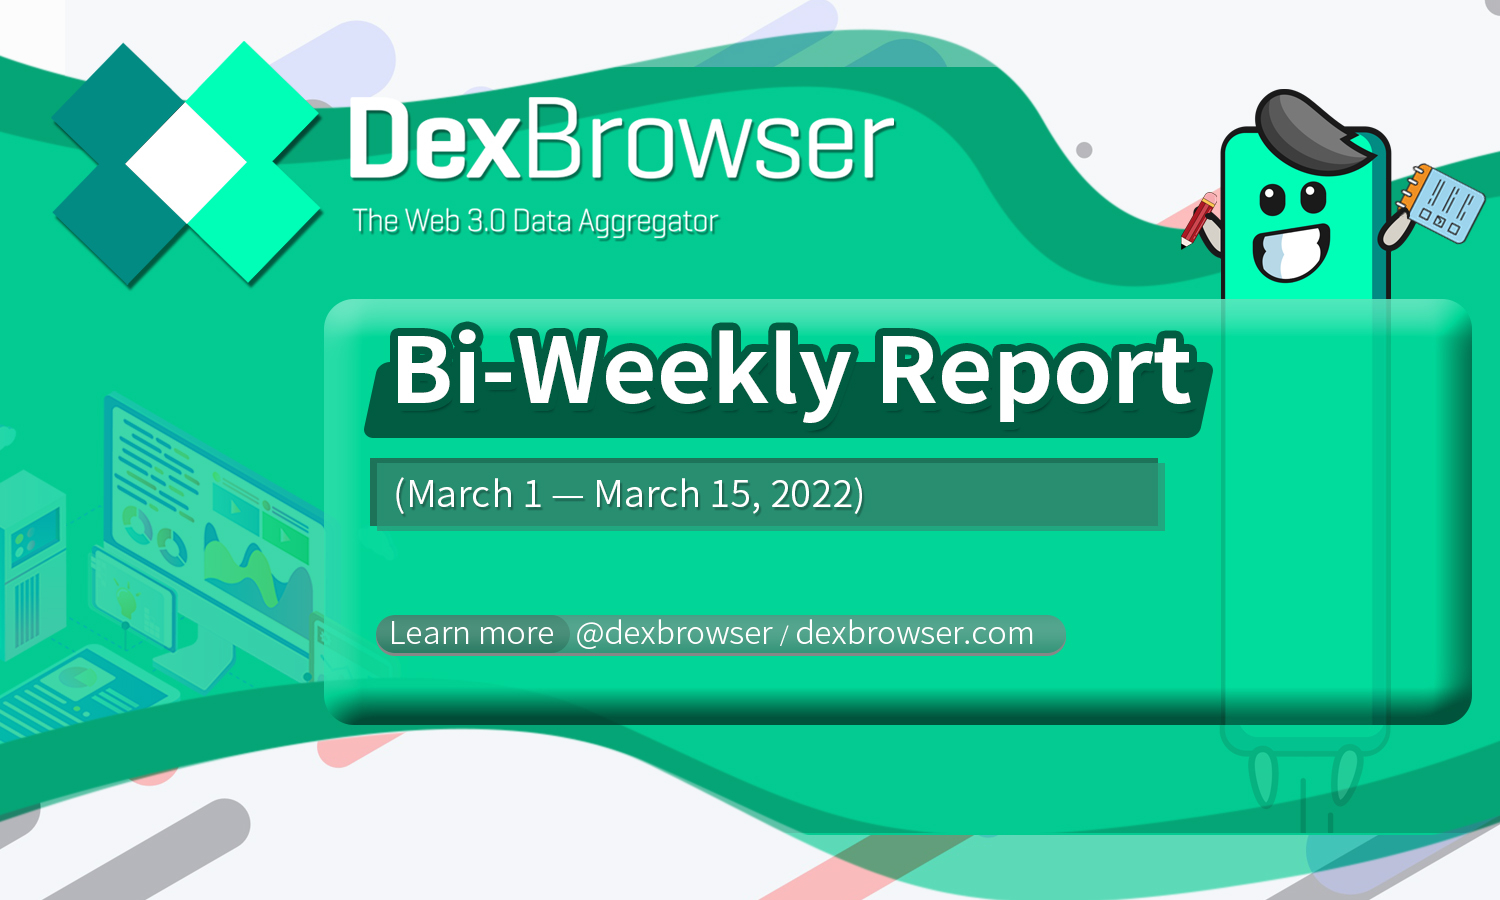 Dexbrowser Bi-Weekly Report (March 1 — March 15, 2022)